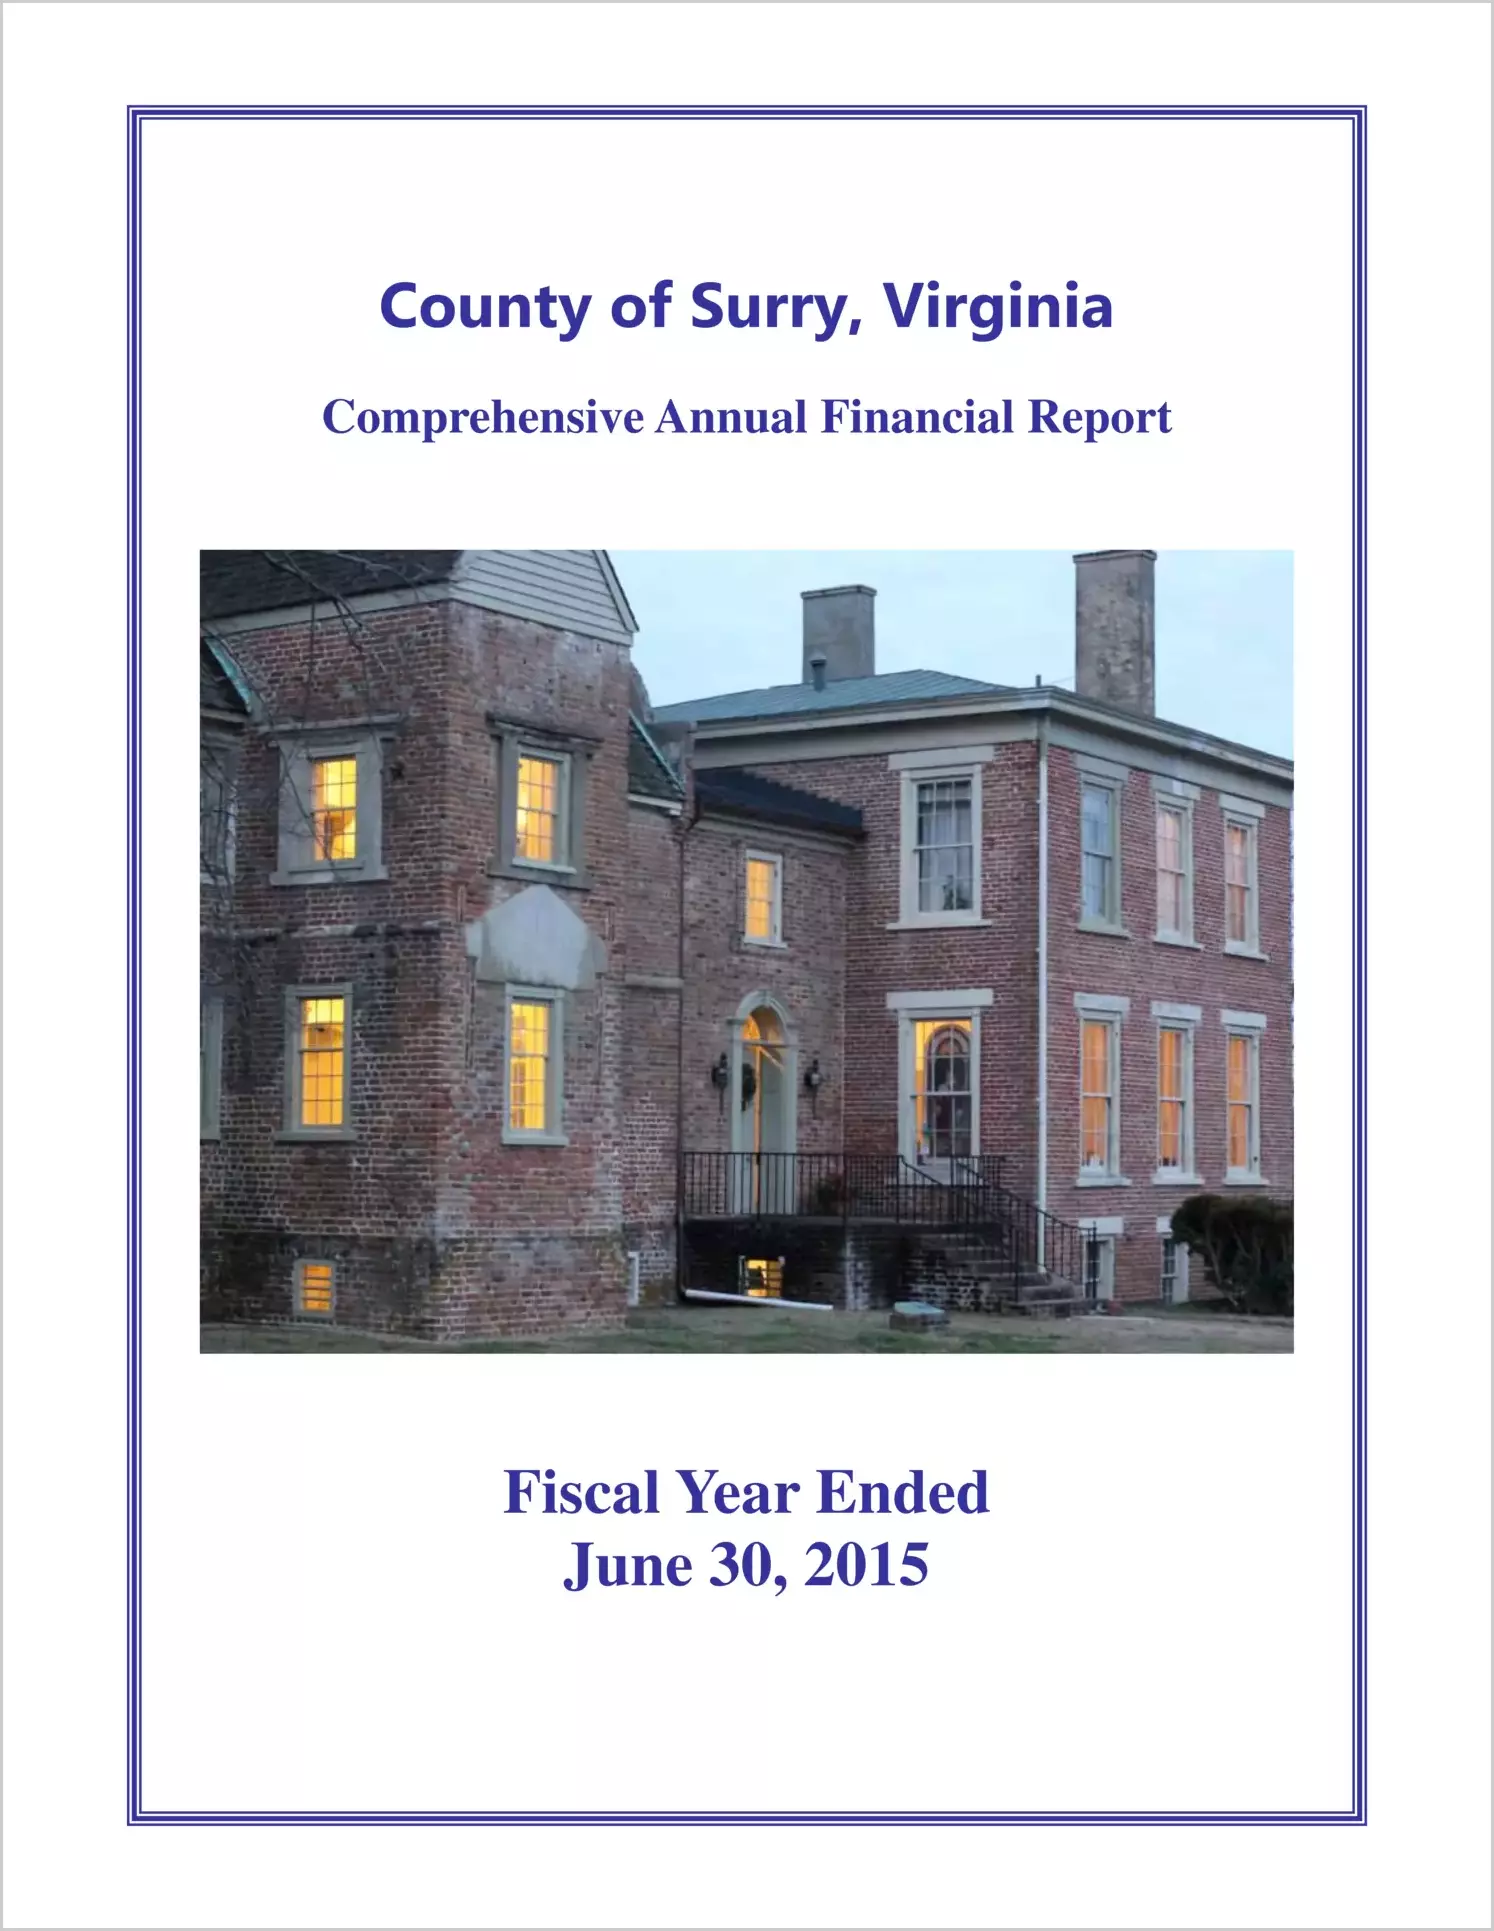 2015 Annual Financial Report for County of Surry